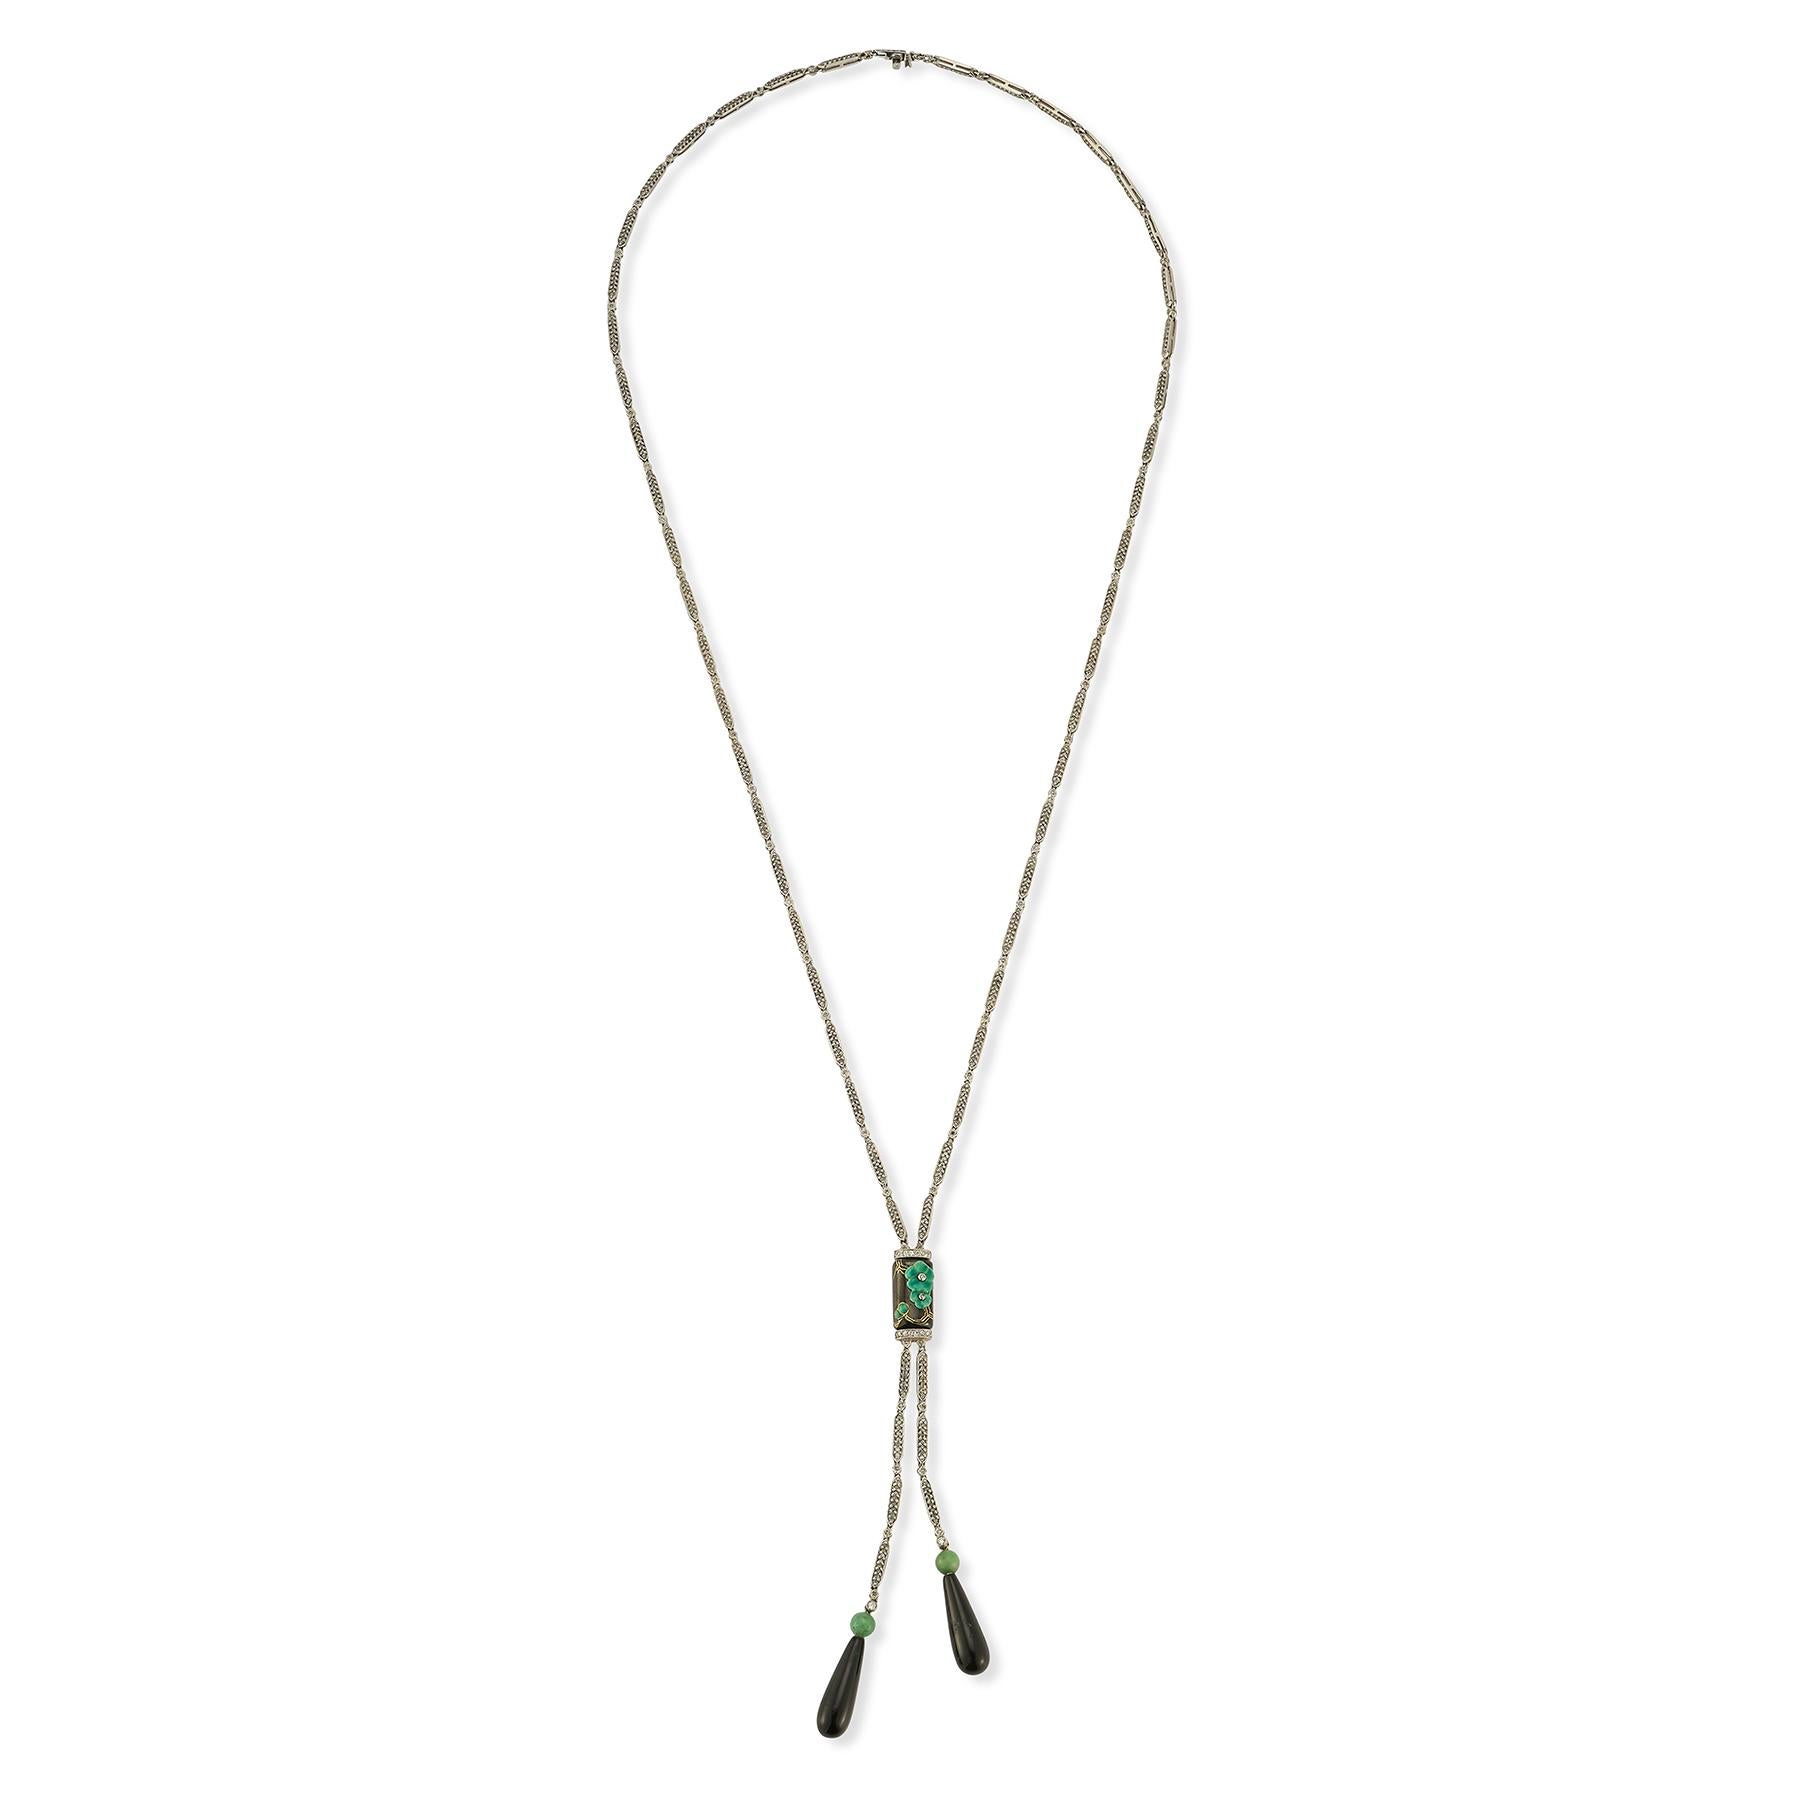 Diamond & Onyx Drop Link Necklace set in 18K white gold, including 2 pear shape onyx drops & 2 Jade beads
Circa 1935
Diamond Weight: 3.80 Cts 
Necklace Measurements: 26